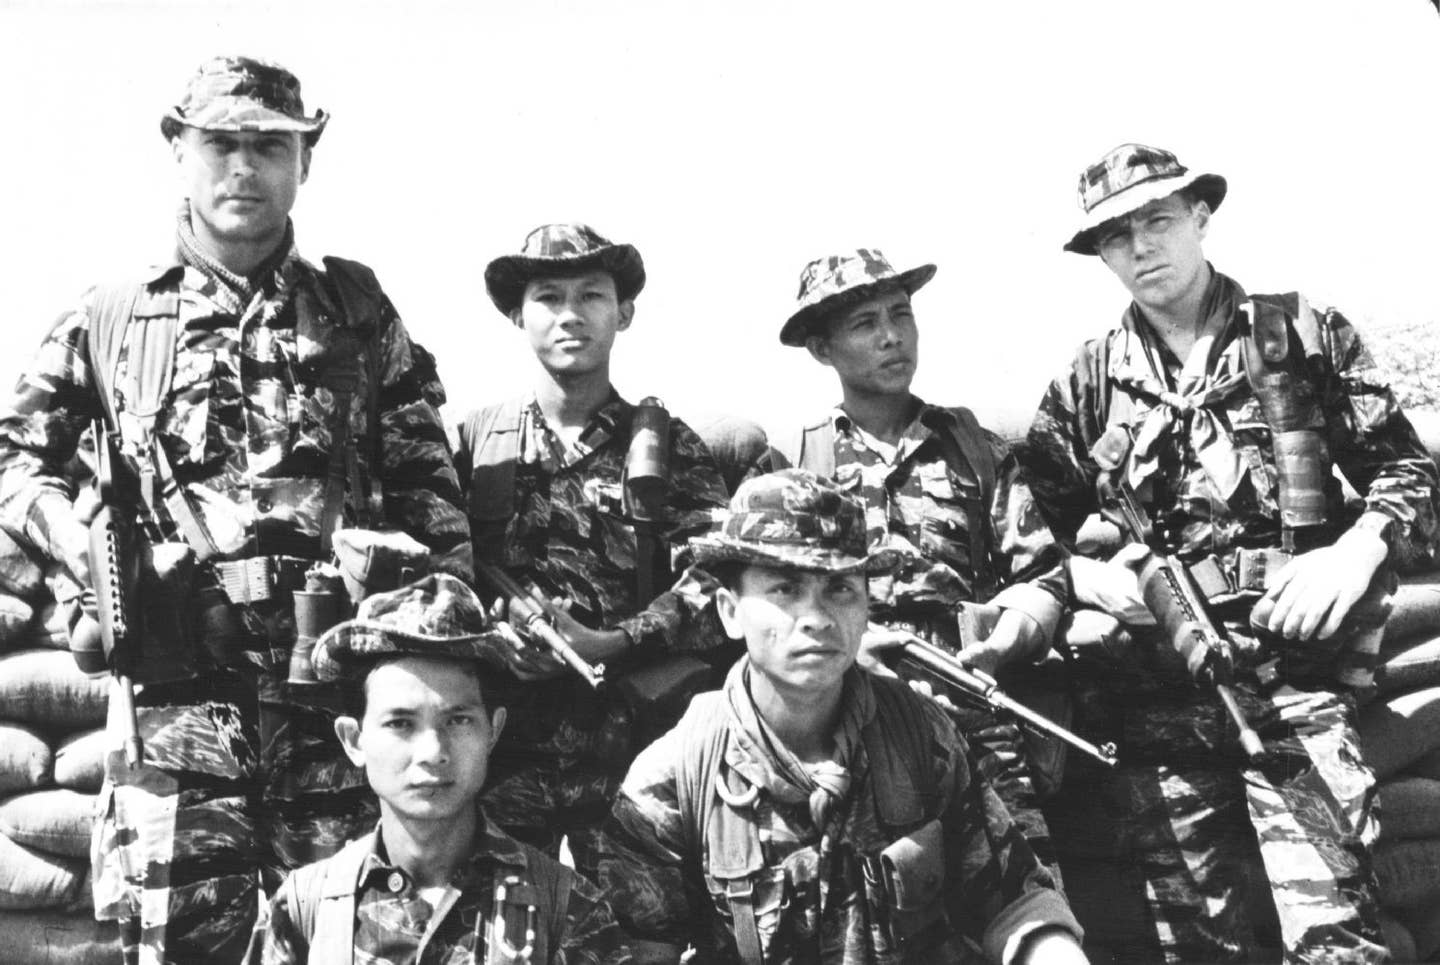 Members of 5th SFG with ARVN troops in Vietnam (Photo Wikimedia Commons)